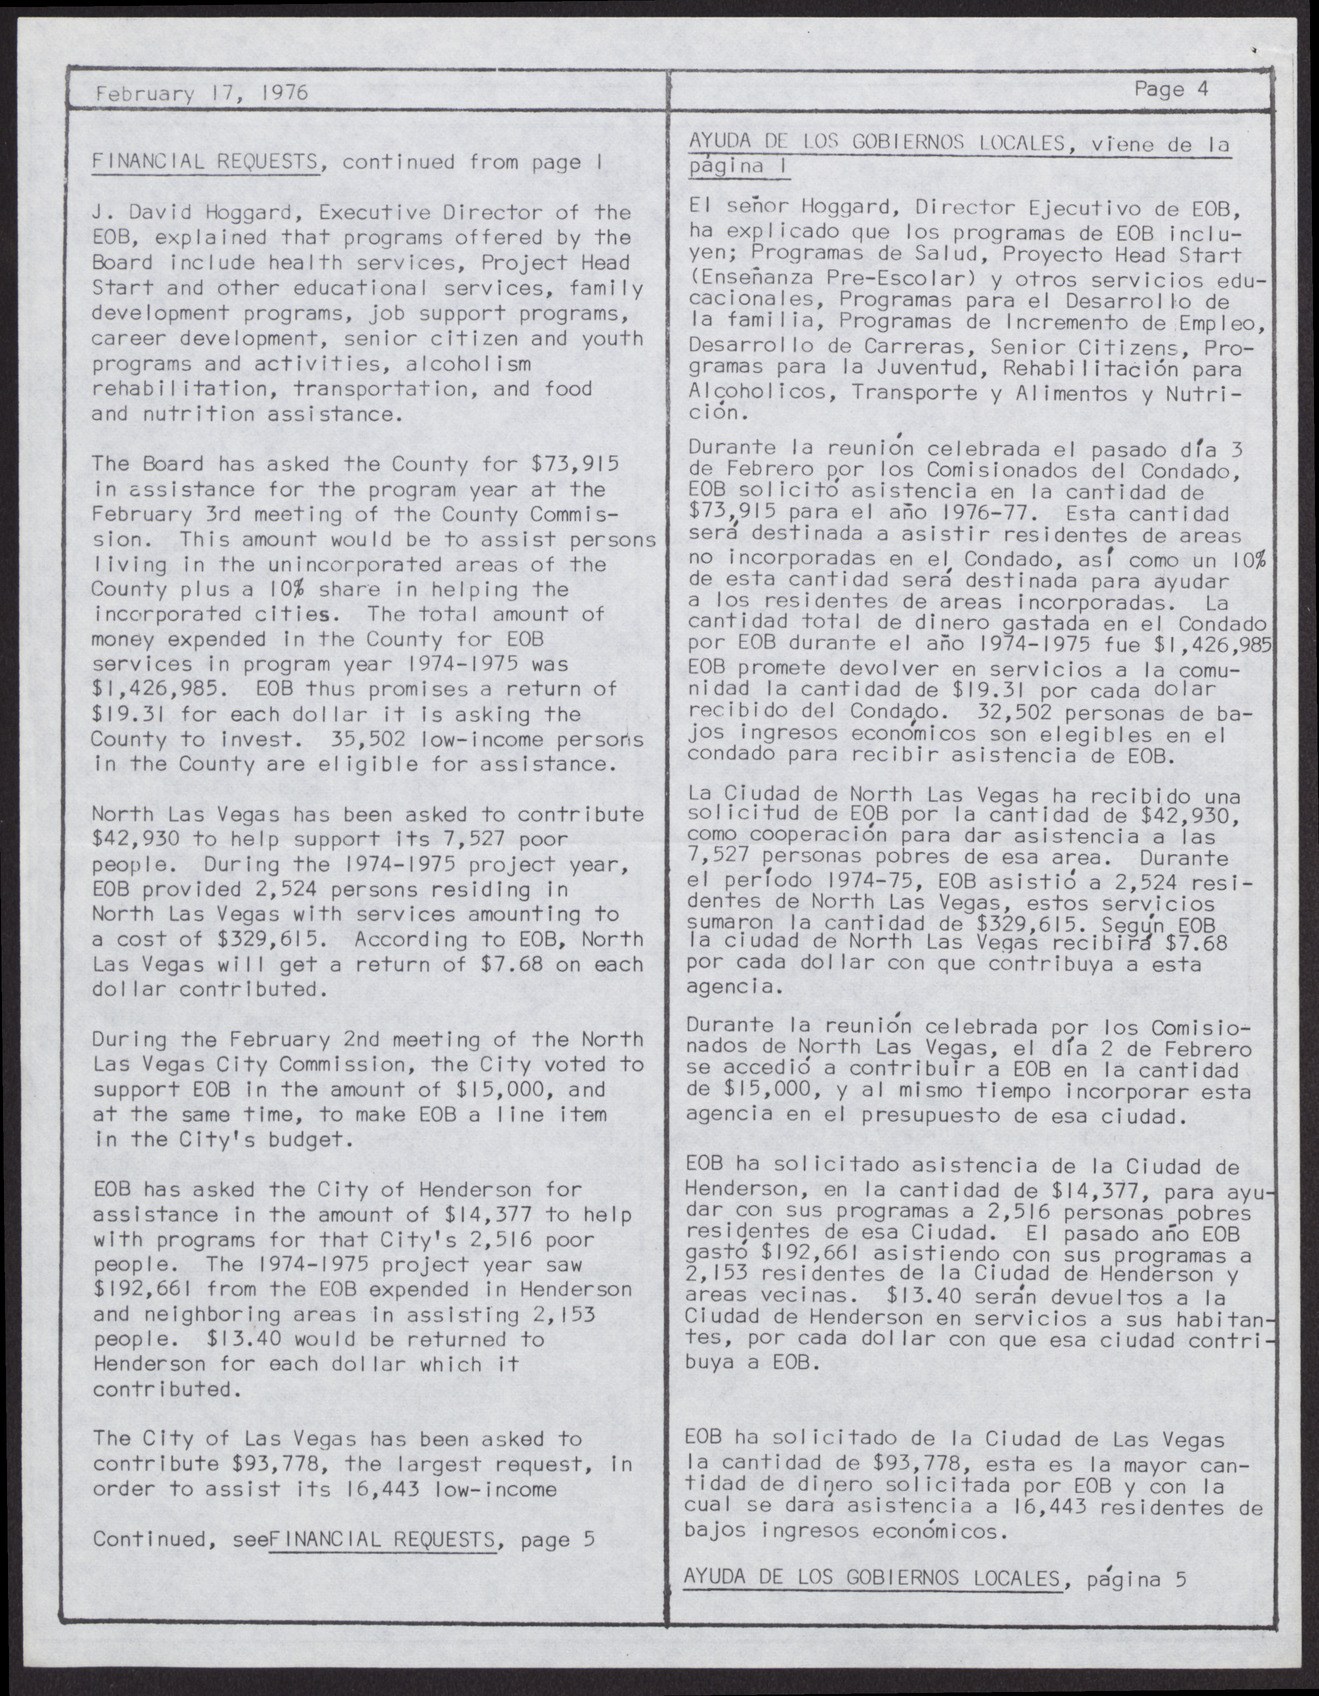 EOB Bulletin newsletter (12 pages), February 17, 1976, page 4